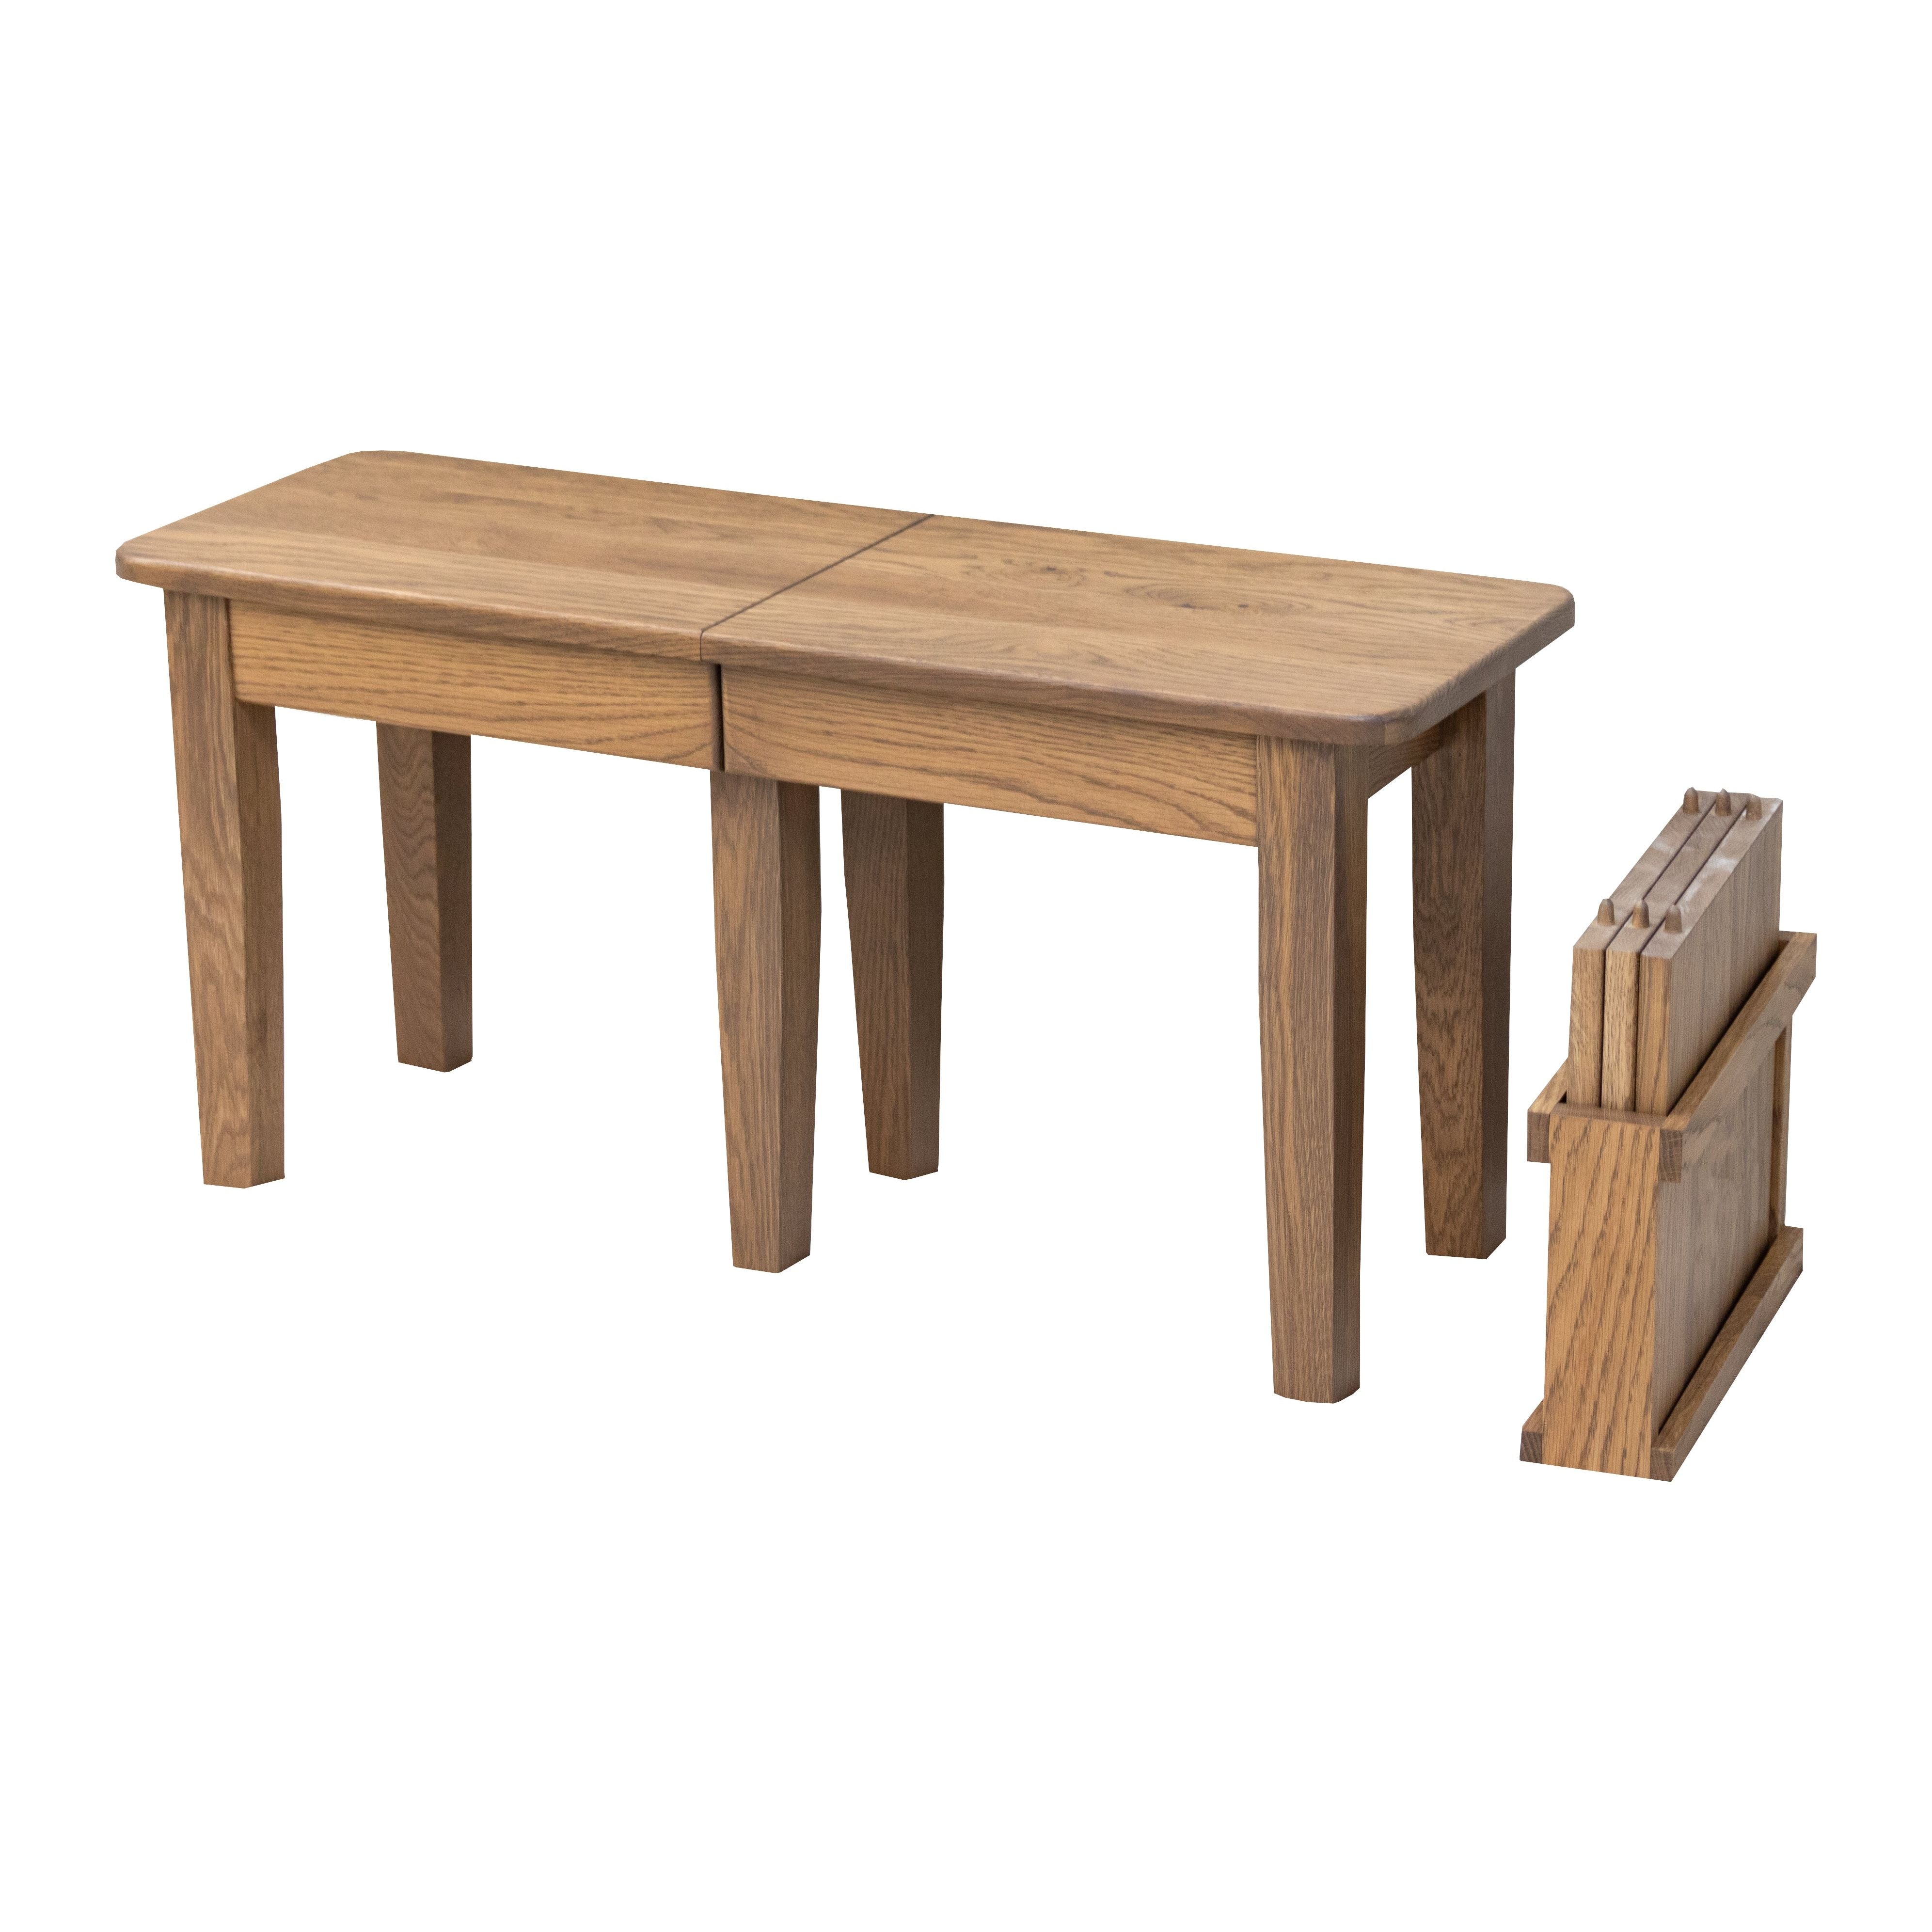 Shaker Expandable Bench, 3' to 6'